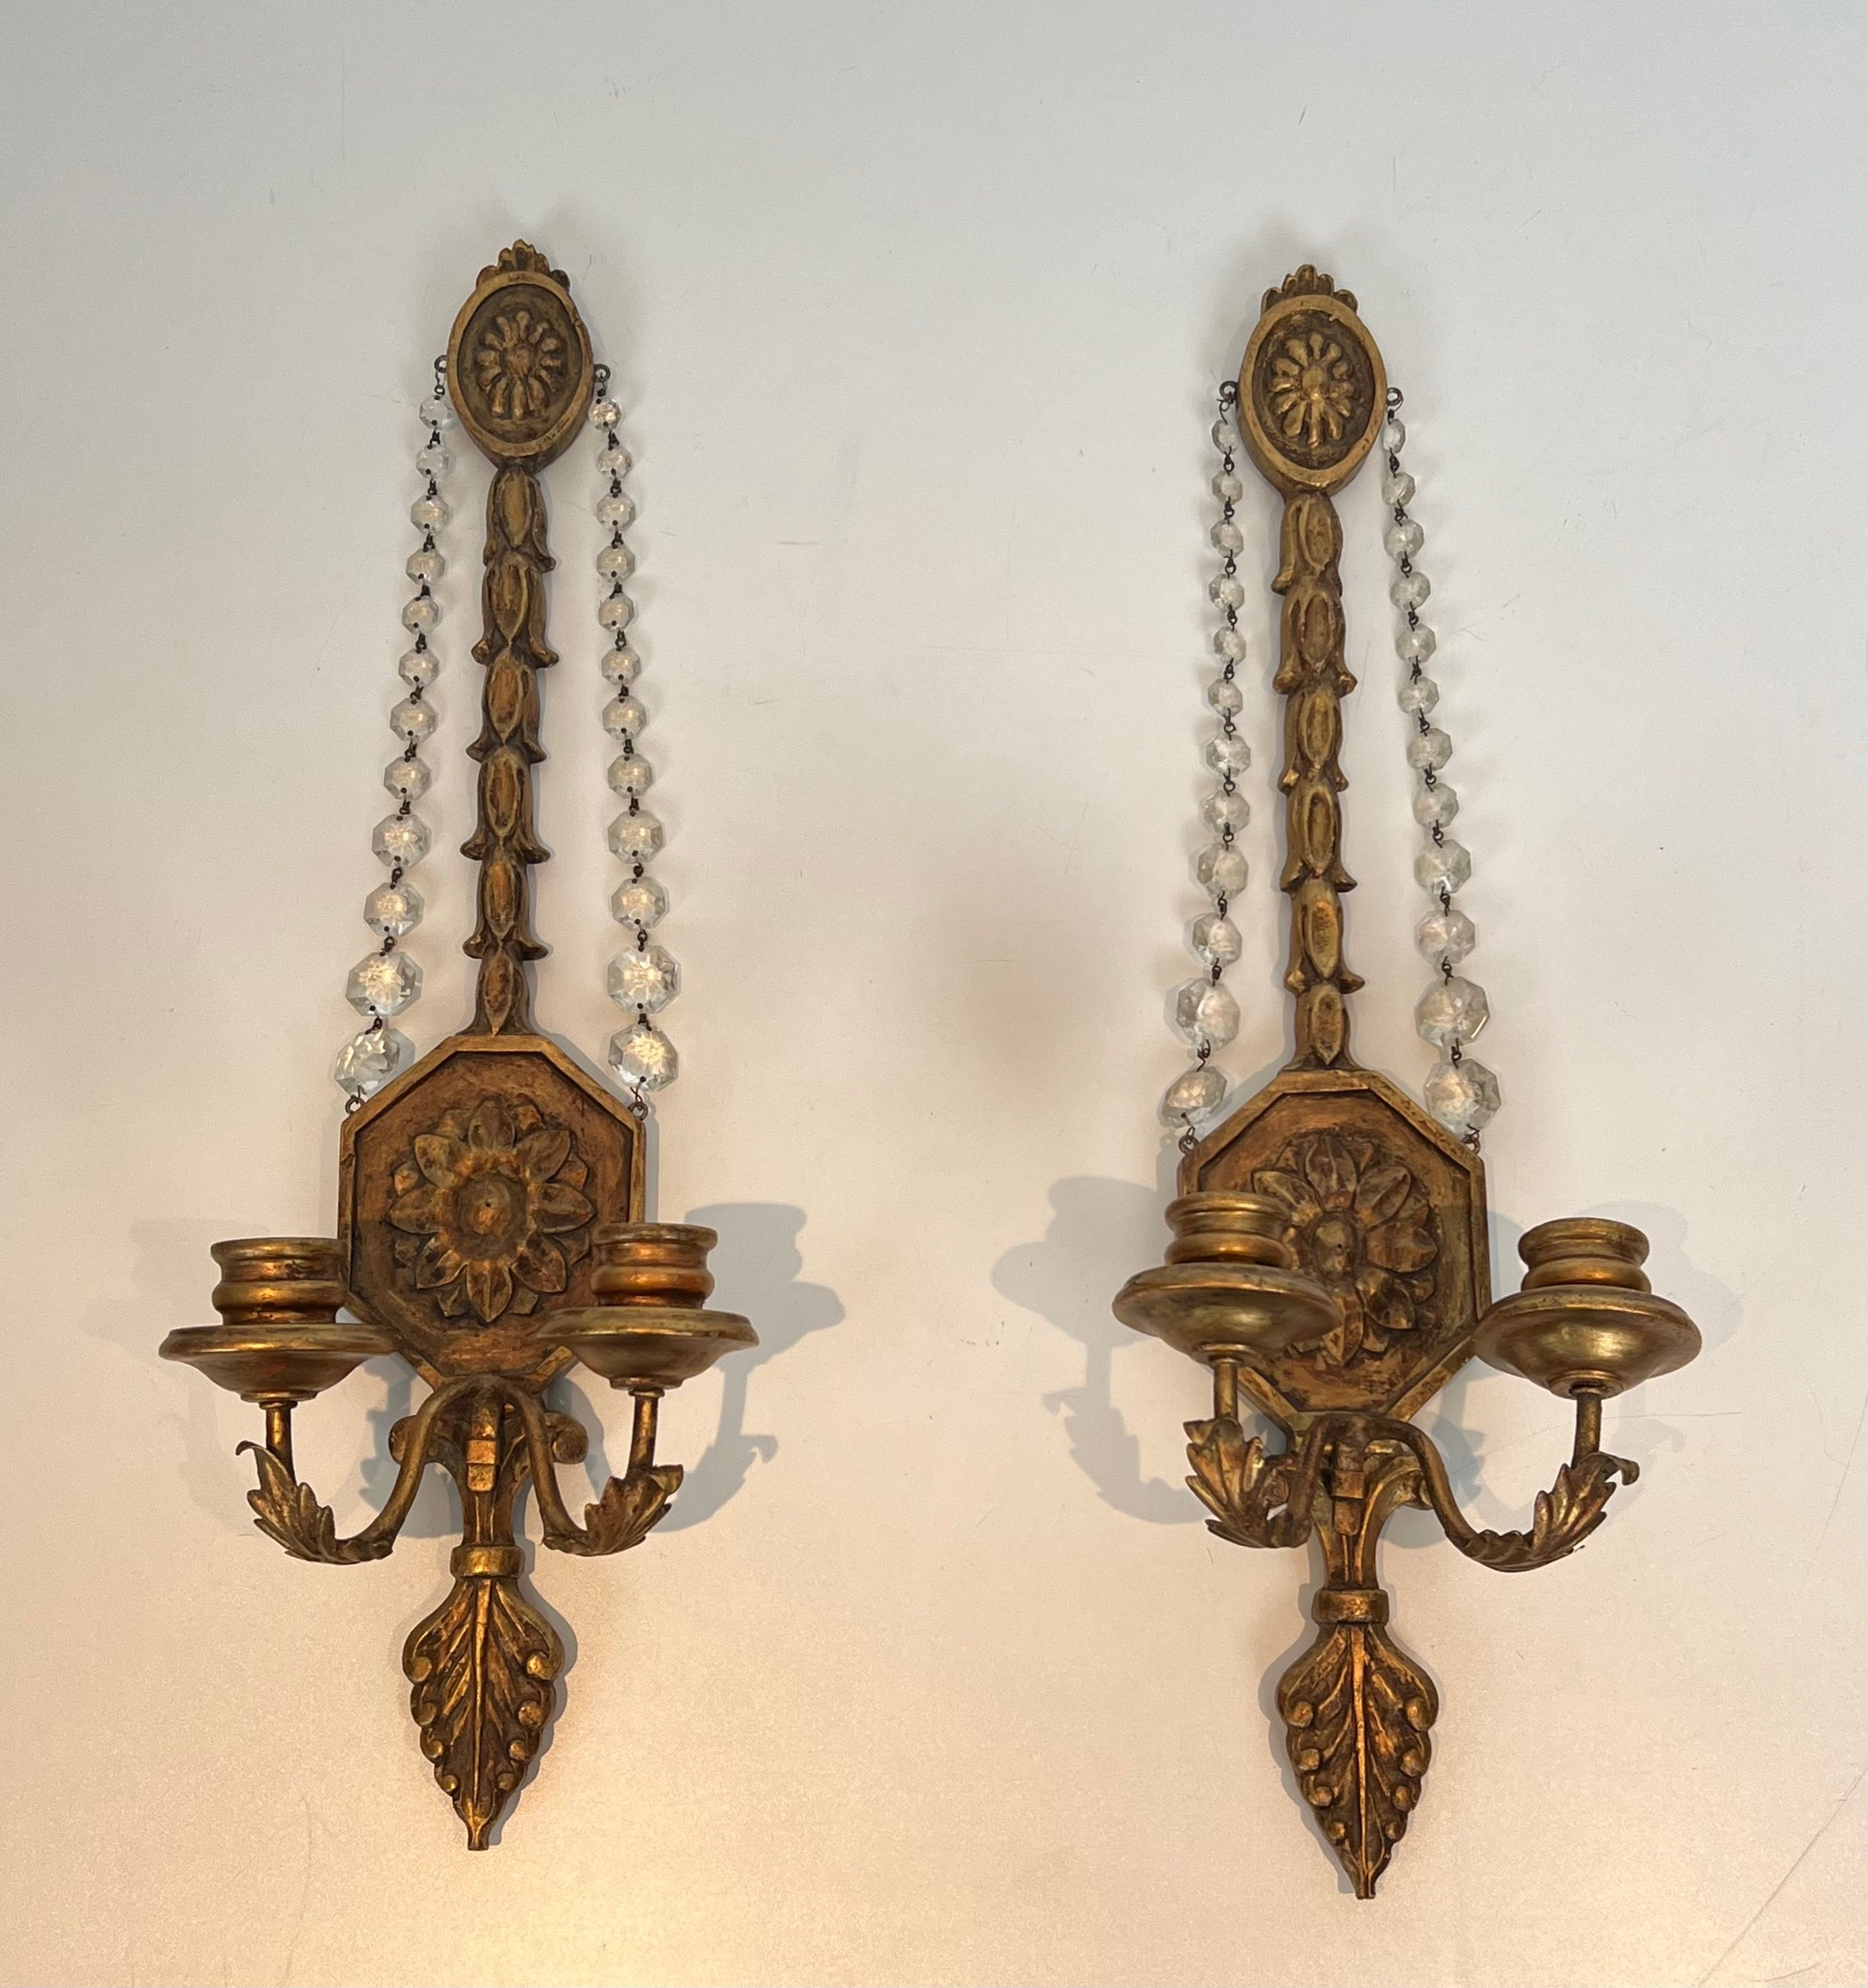 Important Pair of Louis the 16th Style Gilded Carved Wood Wall Sconces with Crystal Garlands